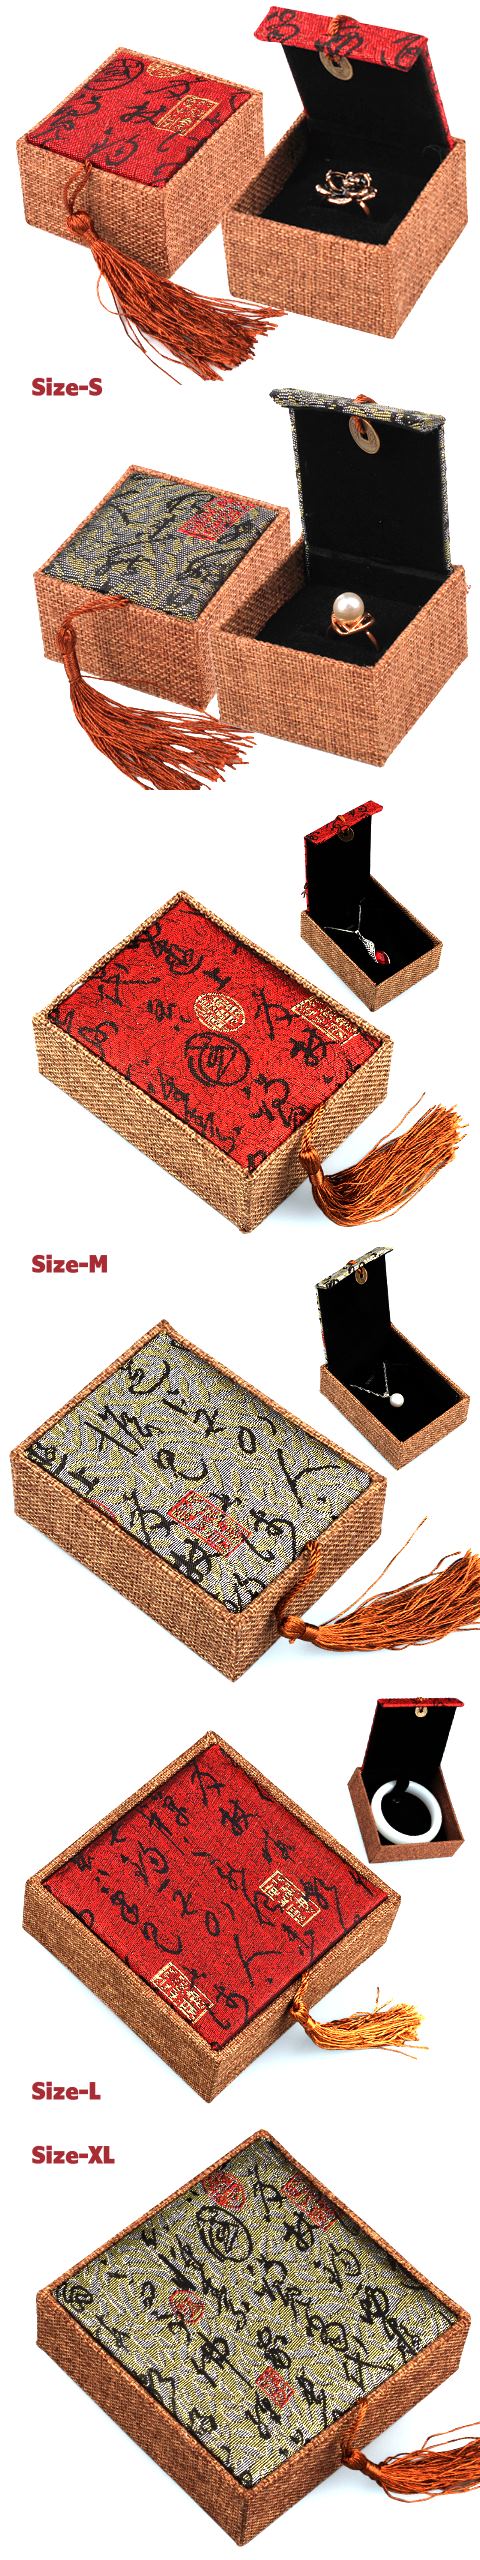 Chinese Poem Calligraphy Brocade Jewelry Box (Multi-Color/Size)